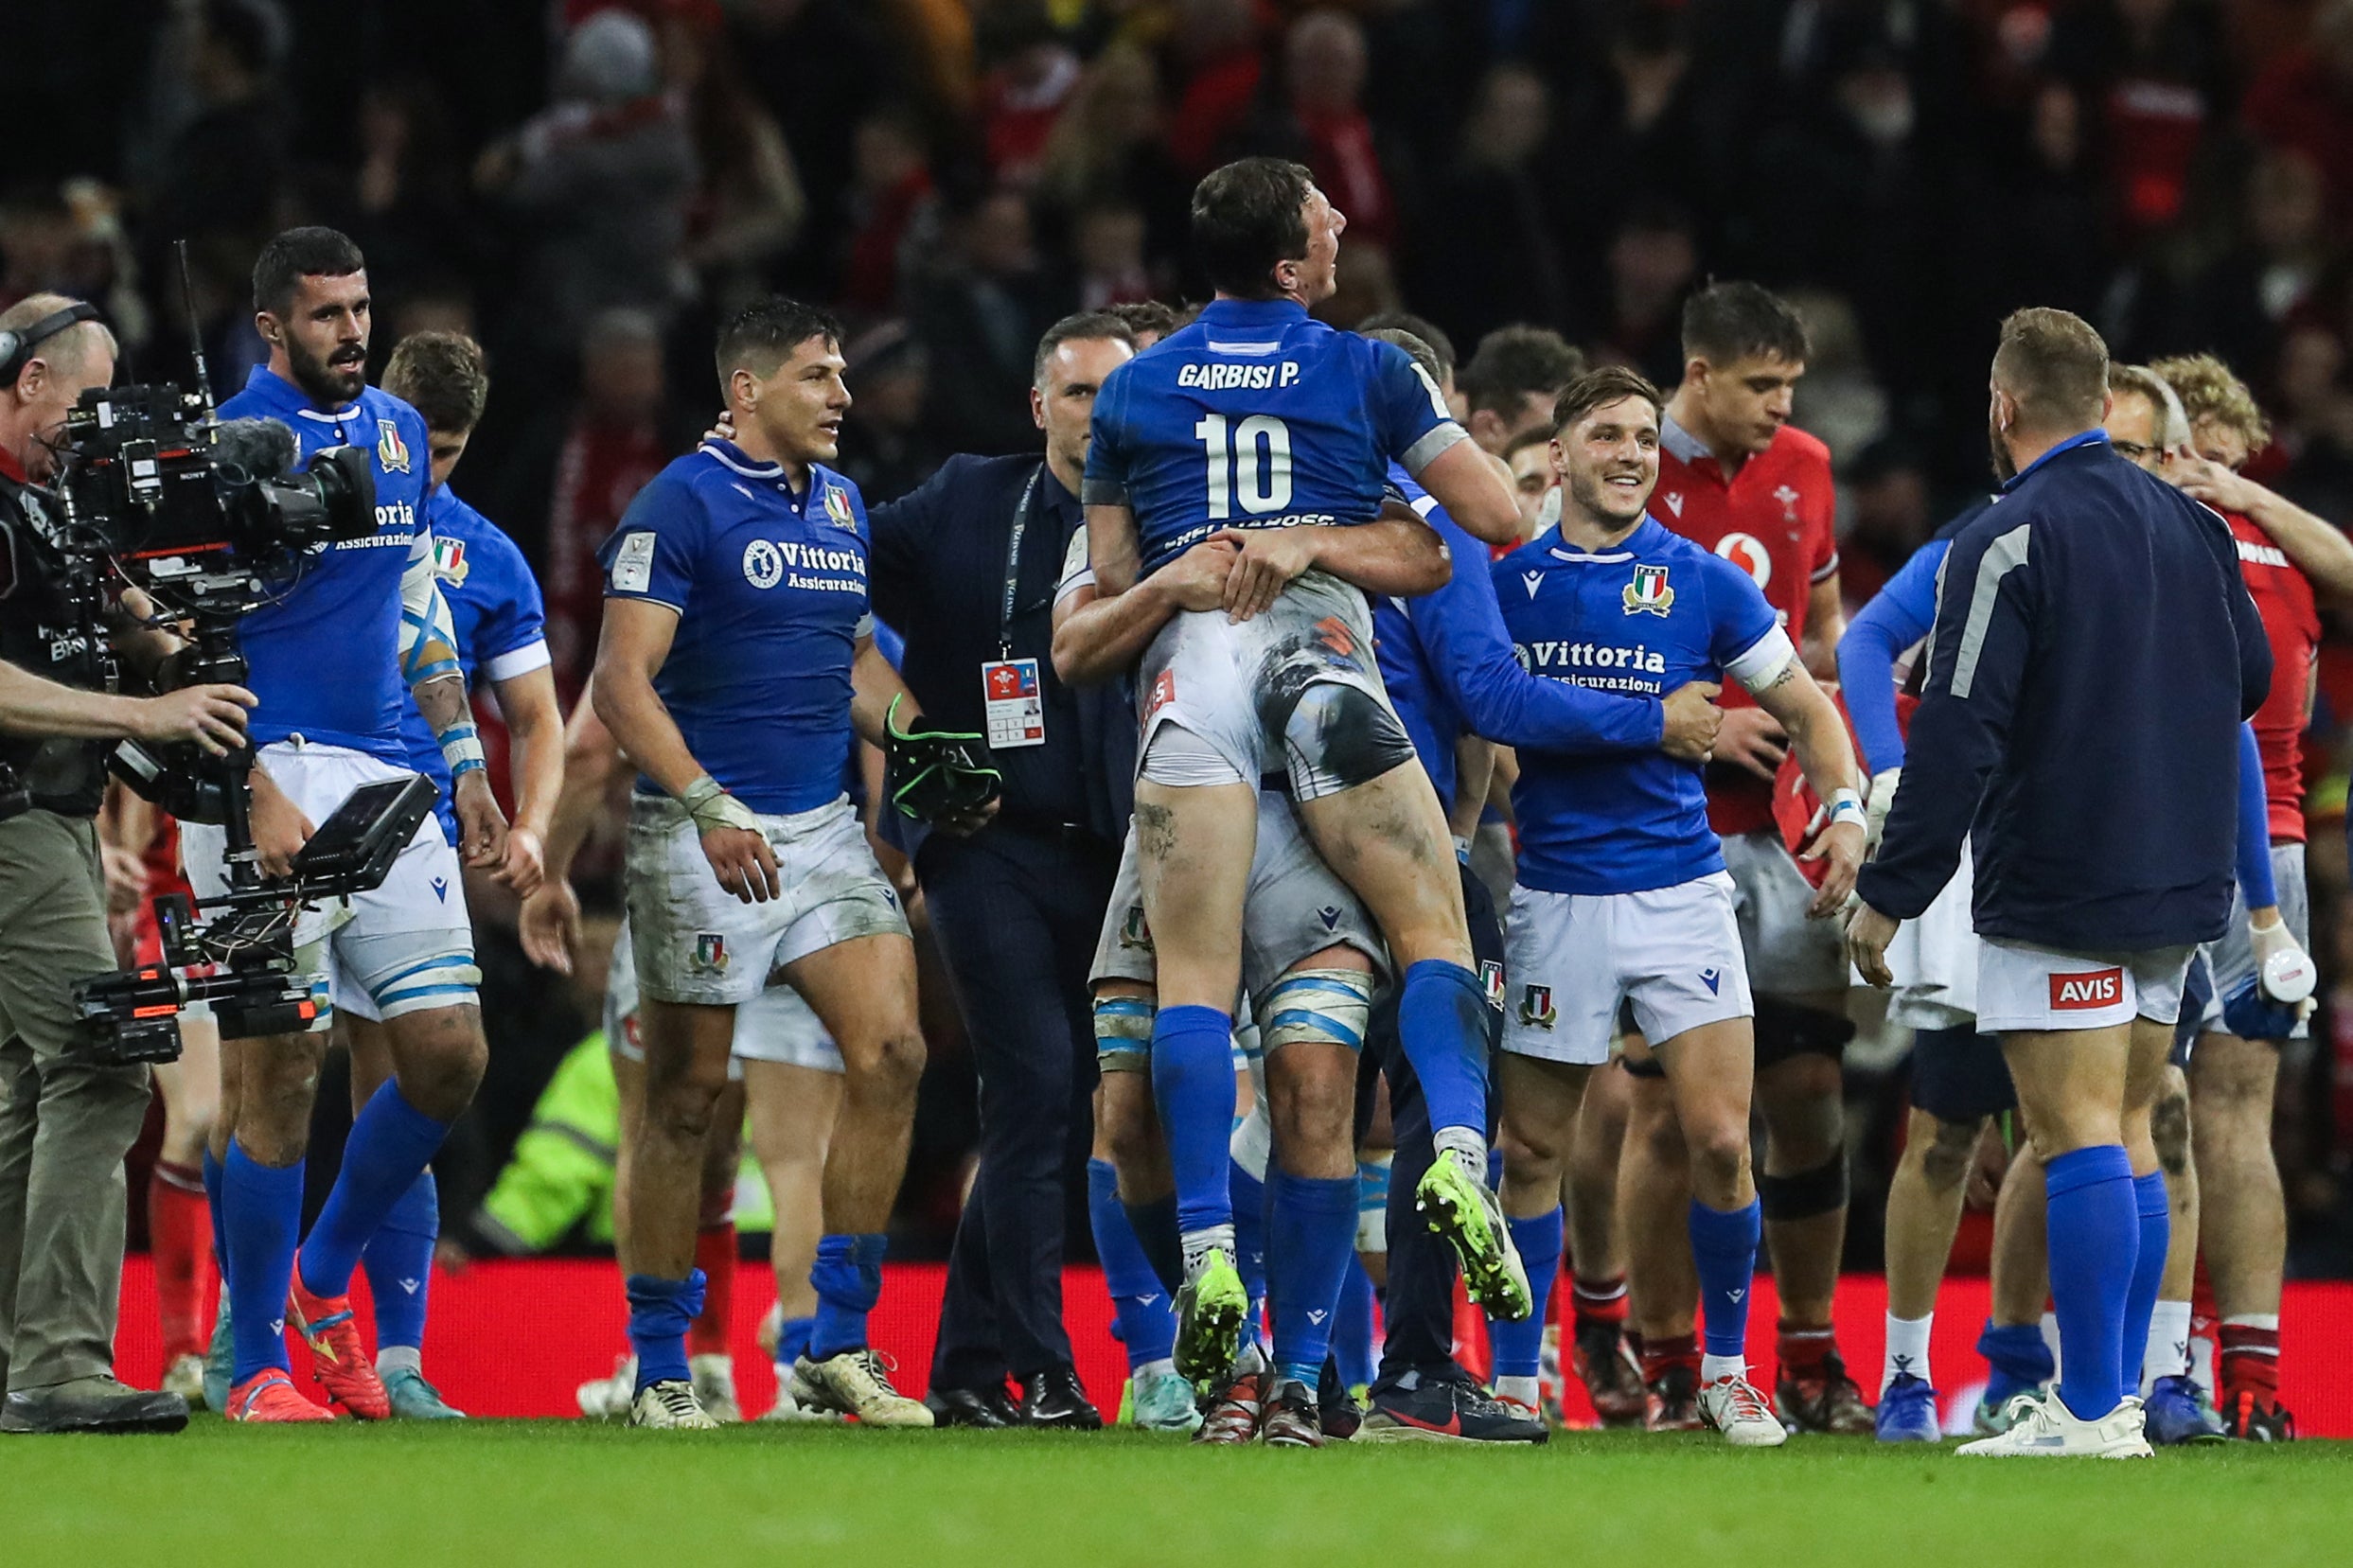 Italy celebrate a 24-21 victory over Wales in Cardiff